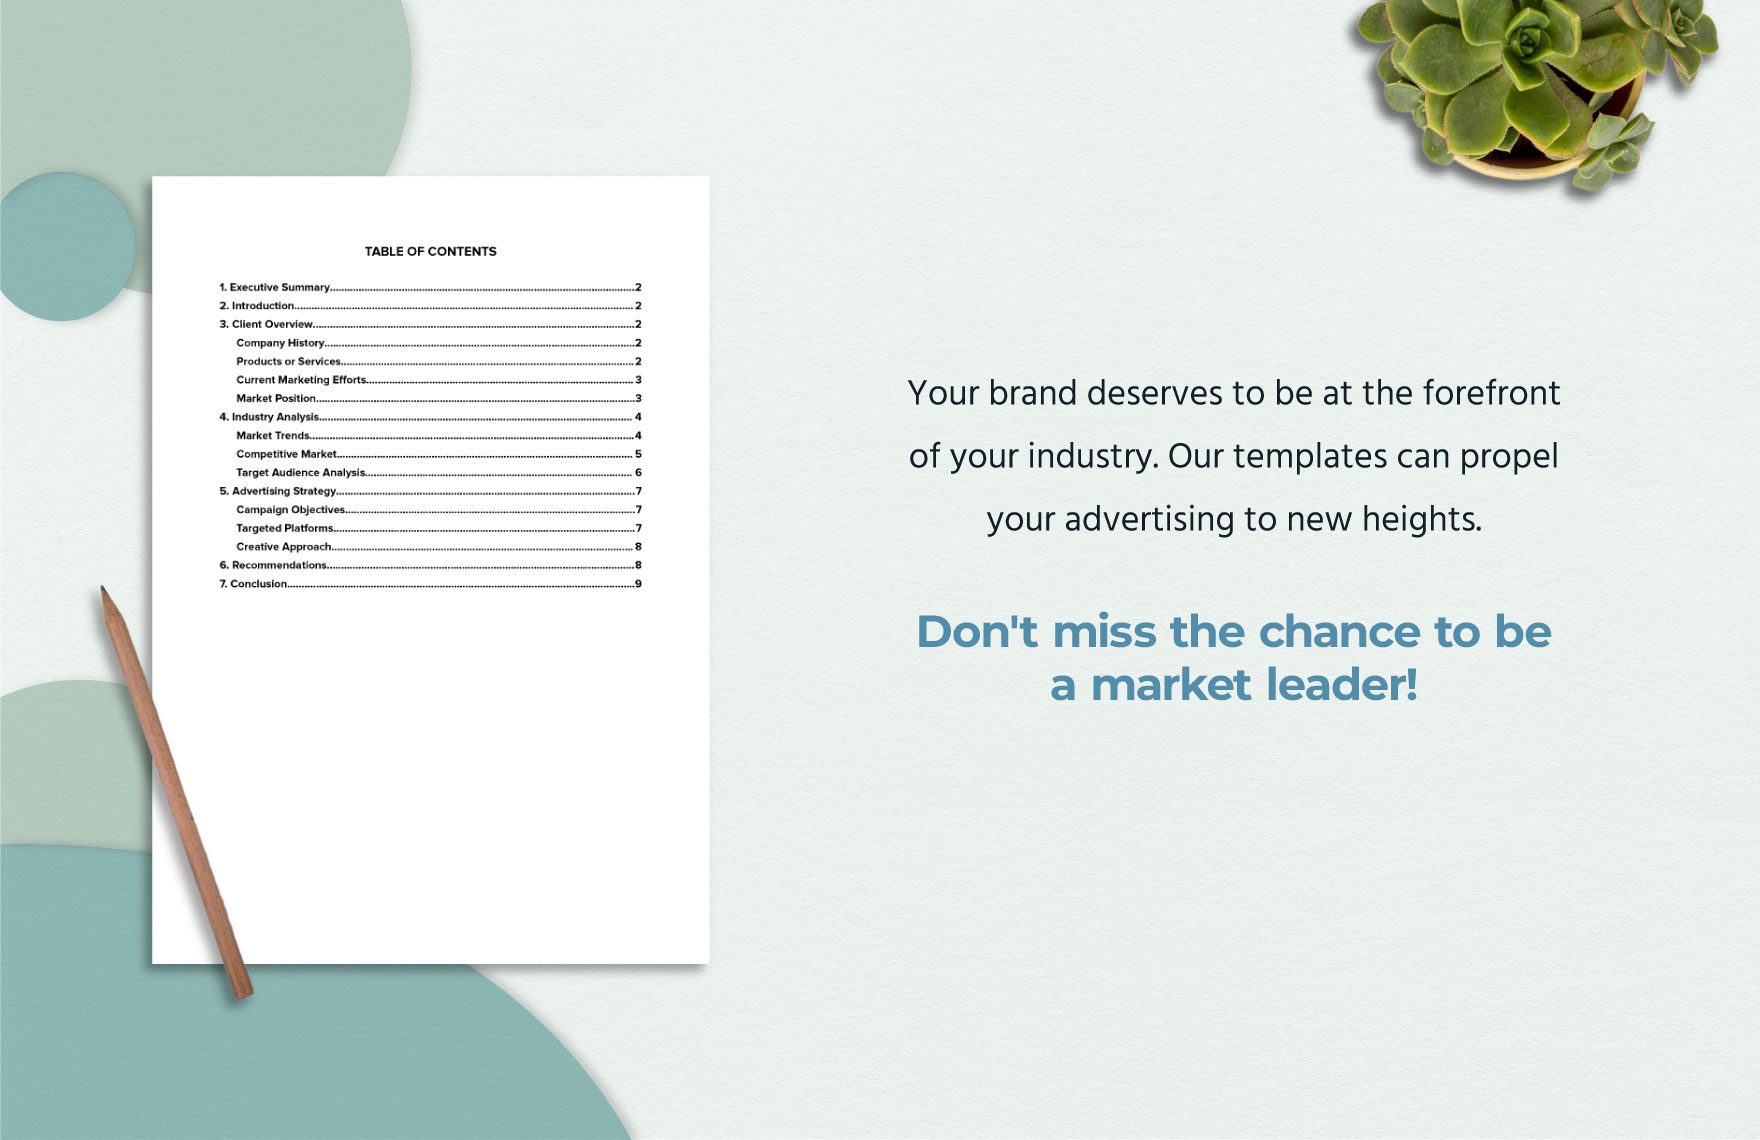 In-Depth Client Industry Analysis Advertising Report Template